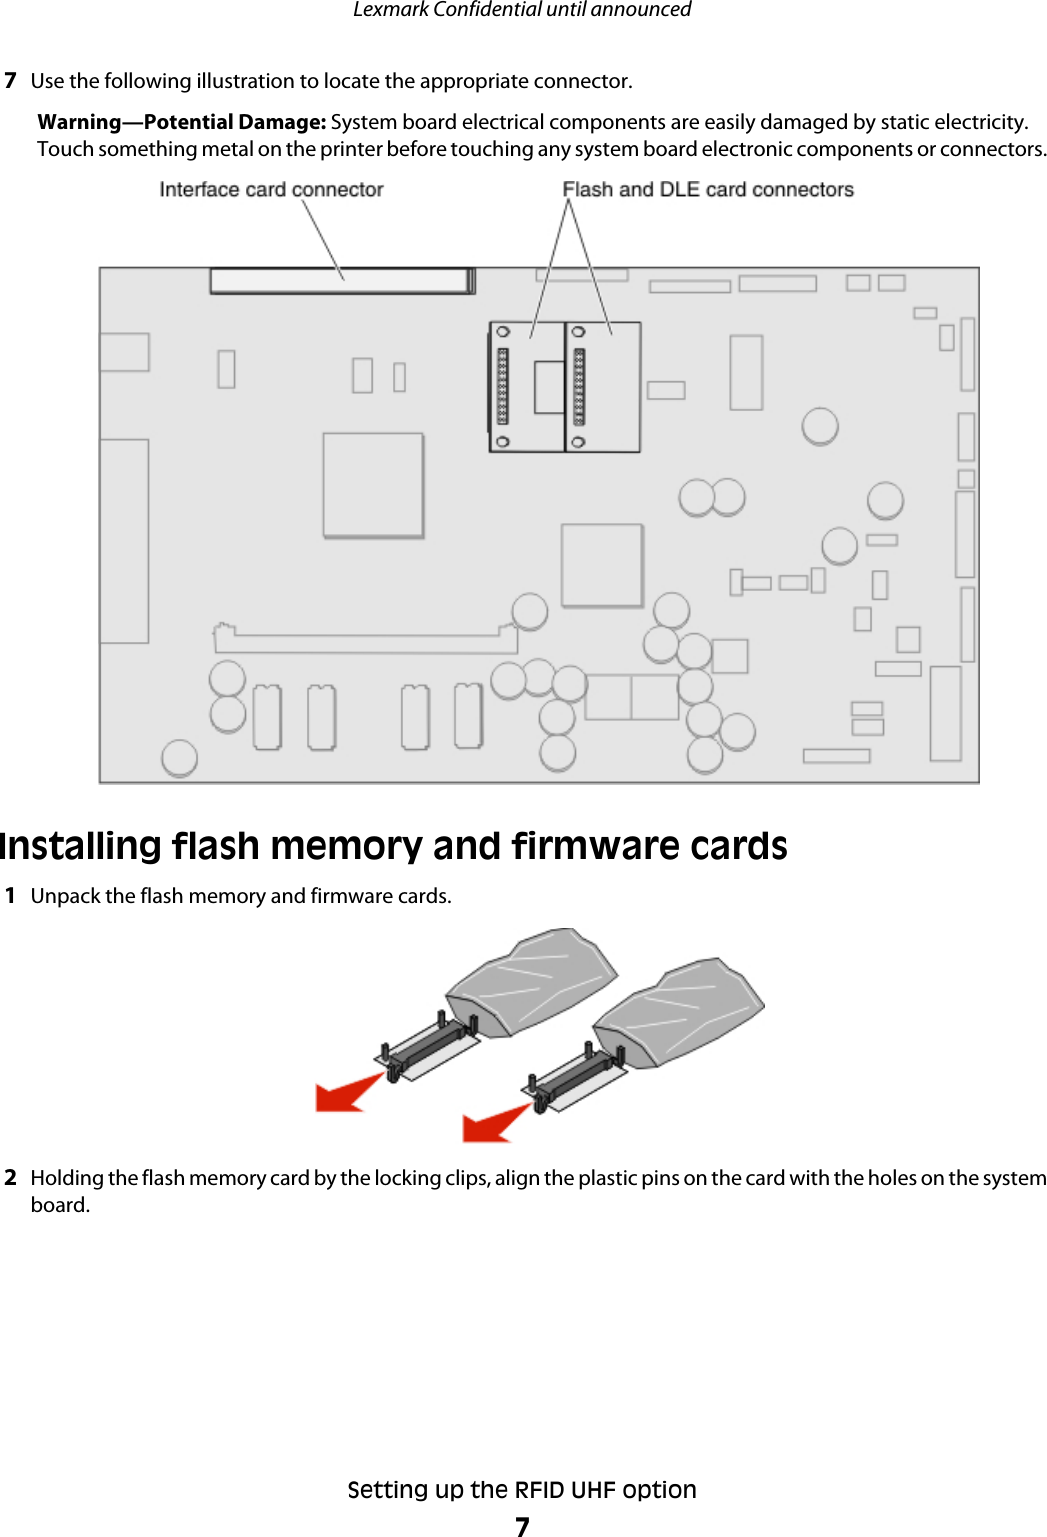 7Use the following illustration to locate the appropriate connector.Warning—Potential Damage: System board electrical components are easily damaged by static electricity.Touch something metal on the printer before touching any system board electronic components or connectors.Installing flash memory and firmware cards1Unpack the flash memory and firmware cards.2Holding the flash memory card by the locking clips, align the plastic pins on the card with the holes on the systemboard.Lexmark Confidential until announcedSetting up the RFID UHF option7